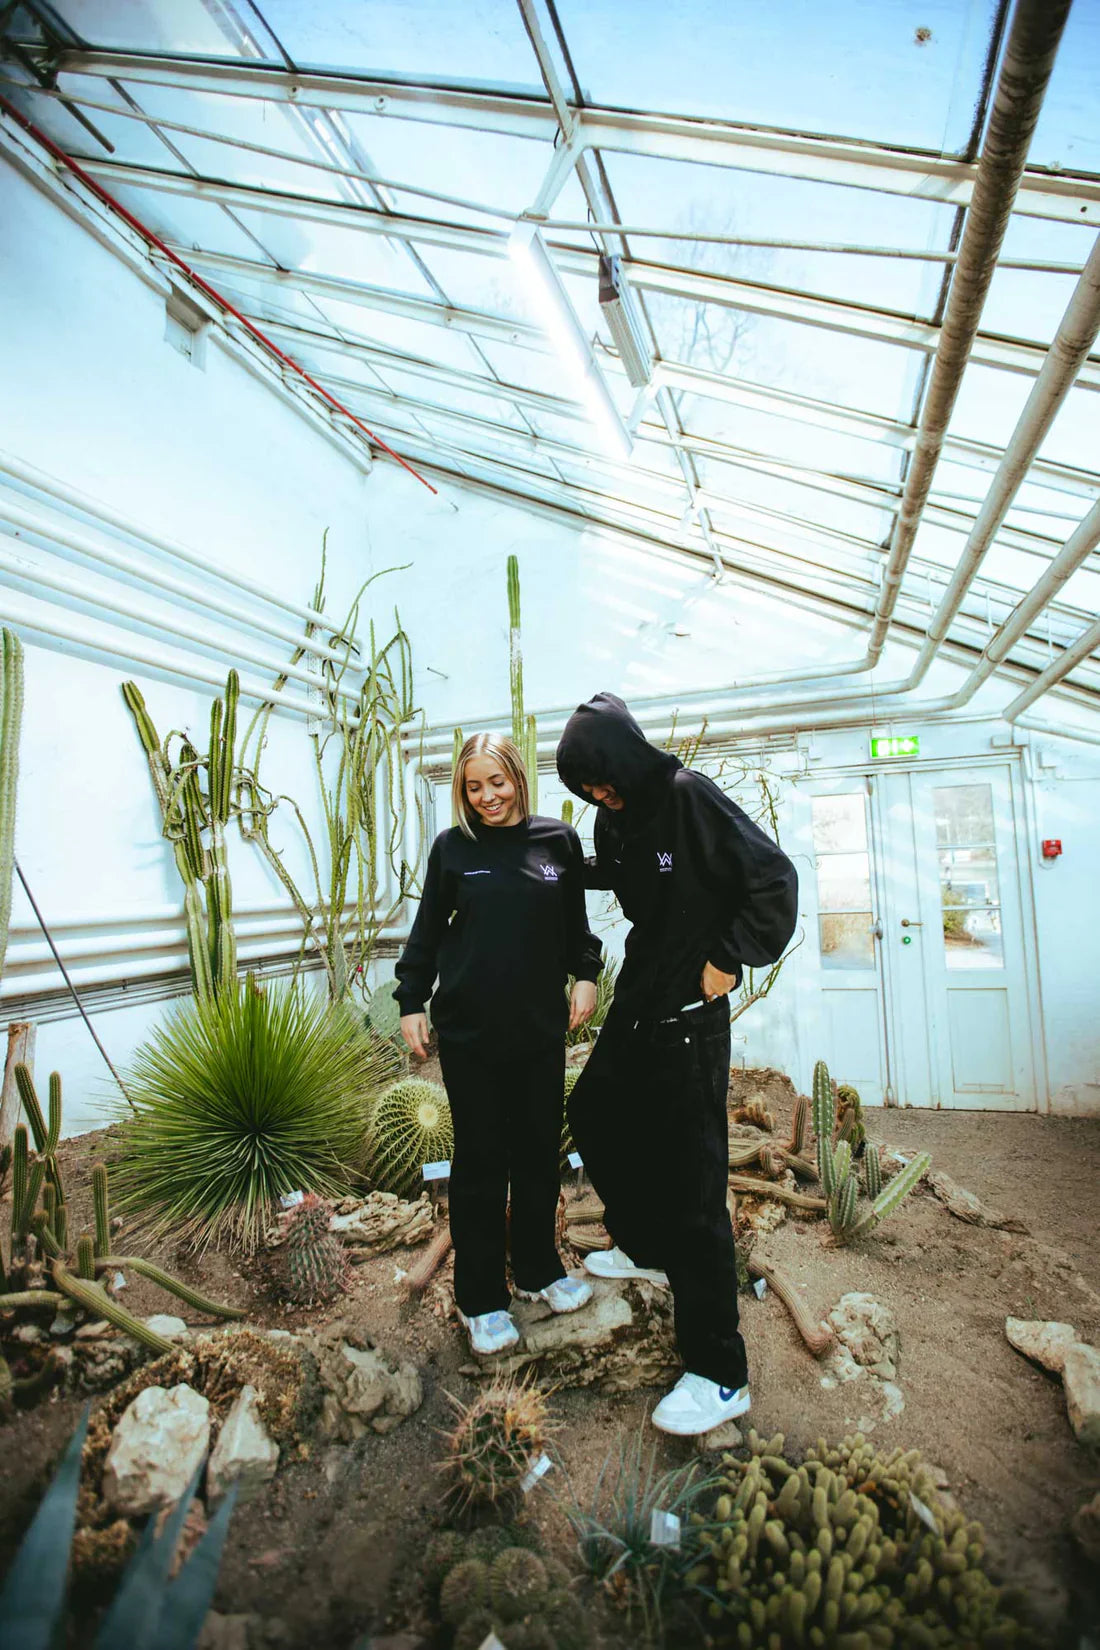 A duo in Melting Rose Hoodies showcasing the unity of Alan Walker fans, set against the backdrop of a serene greenhouse.